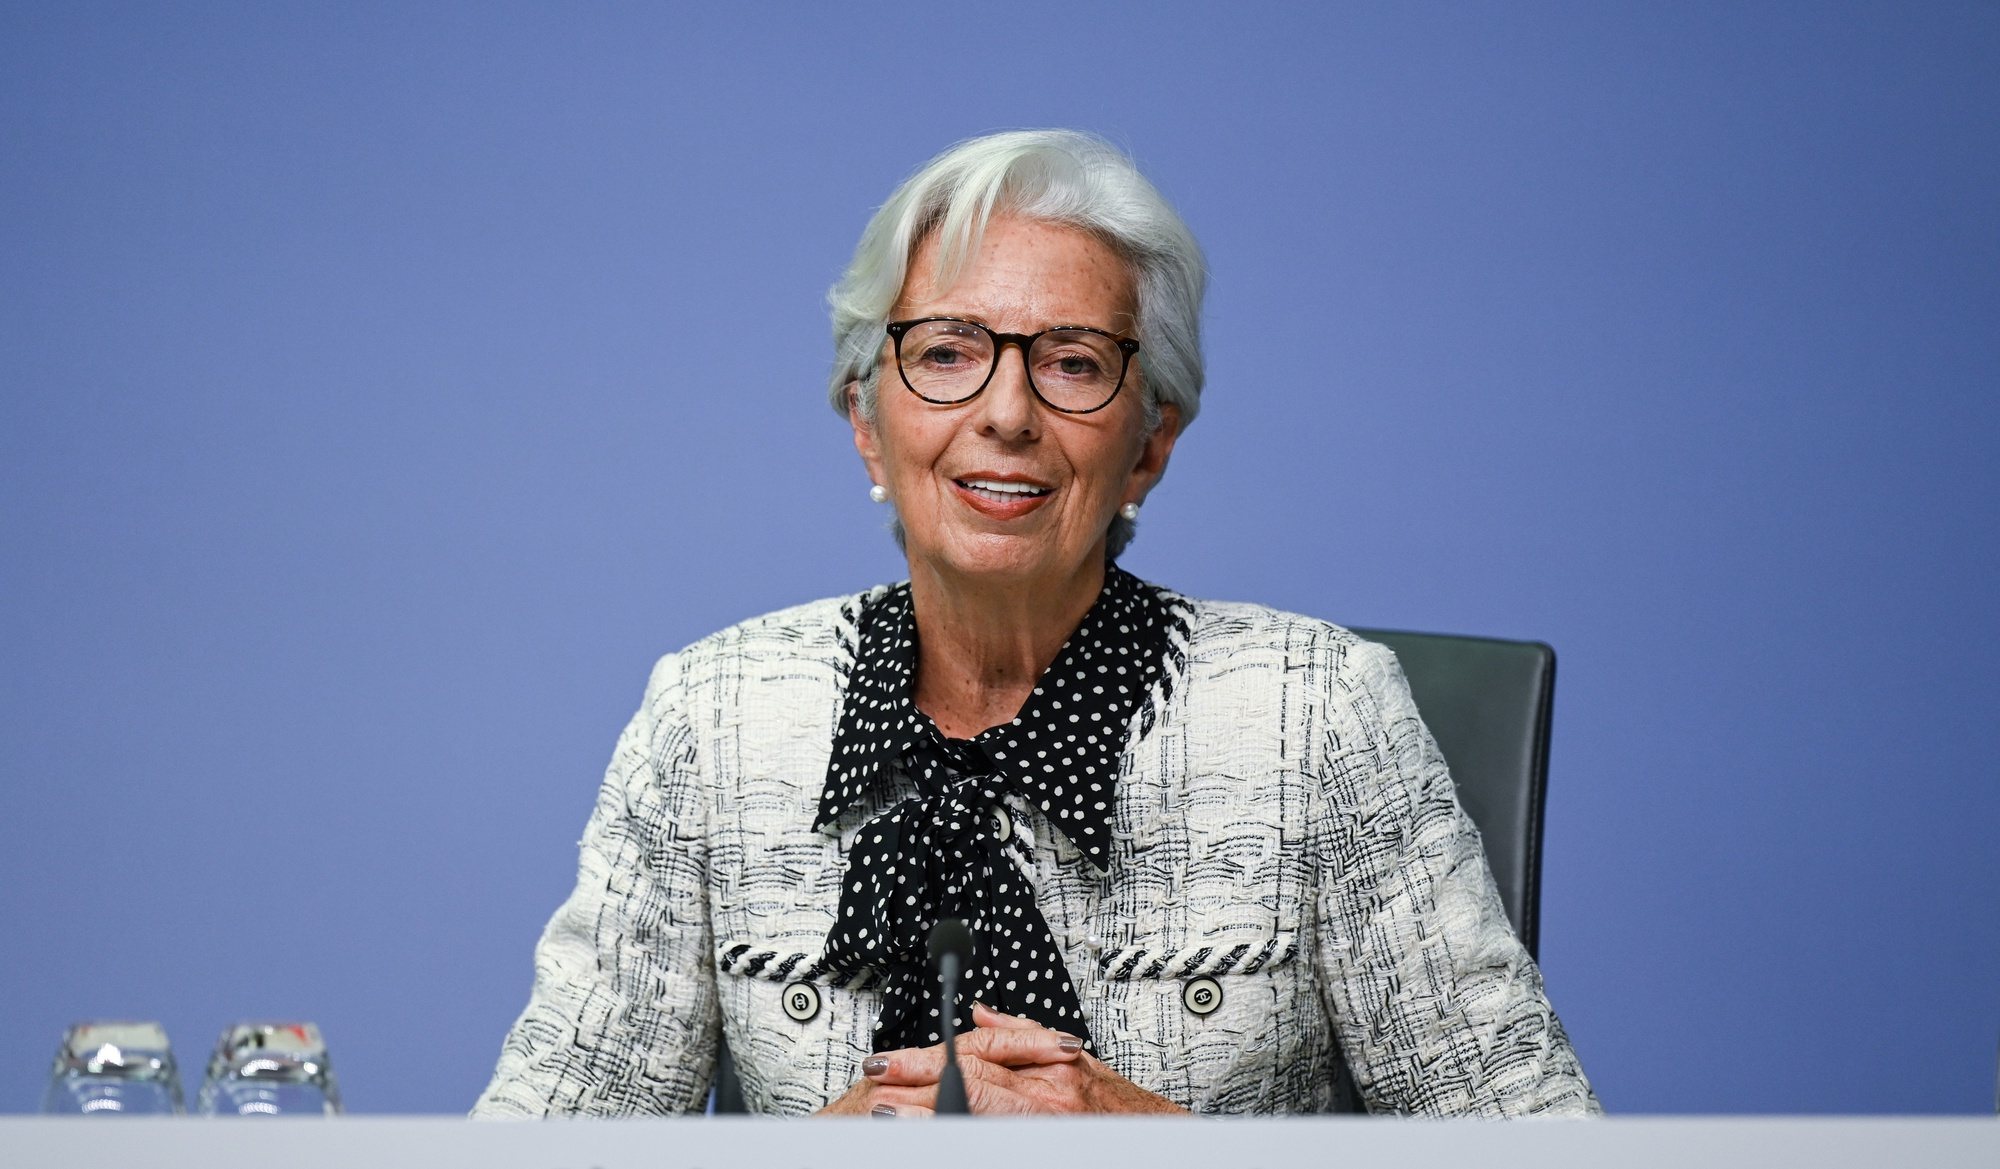 epa08783756 A handout photo made available by European Central Bank shows European Central Bank (ECB) President Christine Lagarde during a press conference following the meeting of the Governing Council of the European Central Bank in Frankfurt am Main, Germany, 29 October 2020.  EPA/SANZIJANA PERJU / EUROPEAN CENTRAL BANK / HANDOUT  HANDOUT EDITORIAL USE ONLY/NO SALES